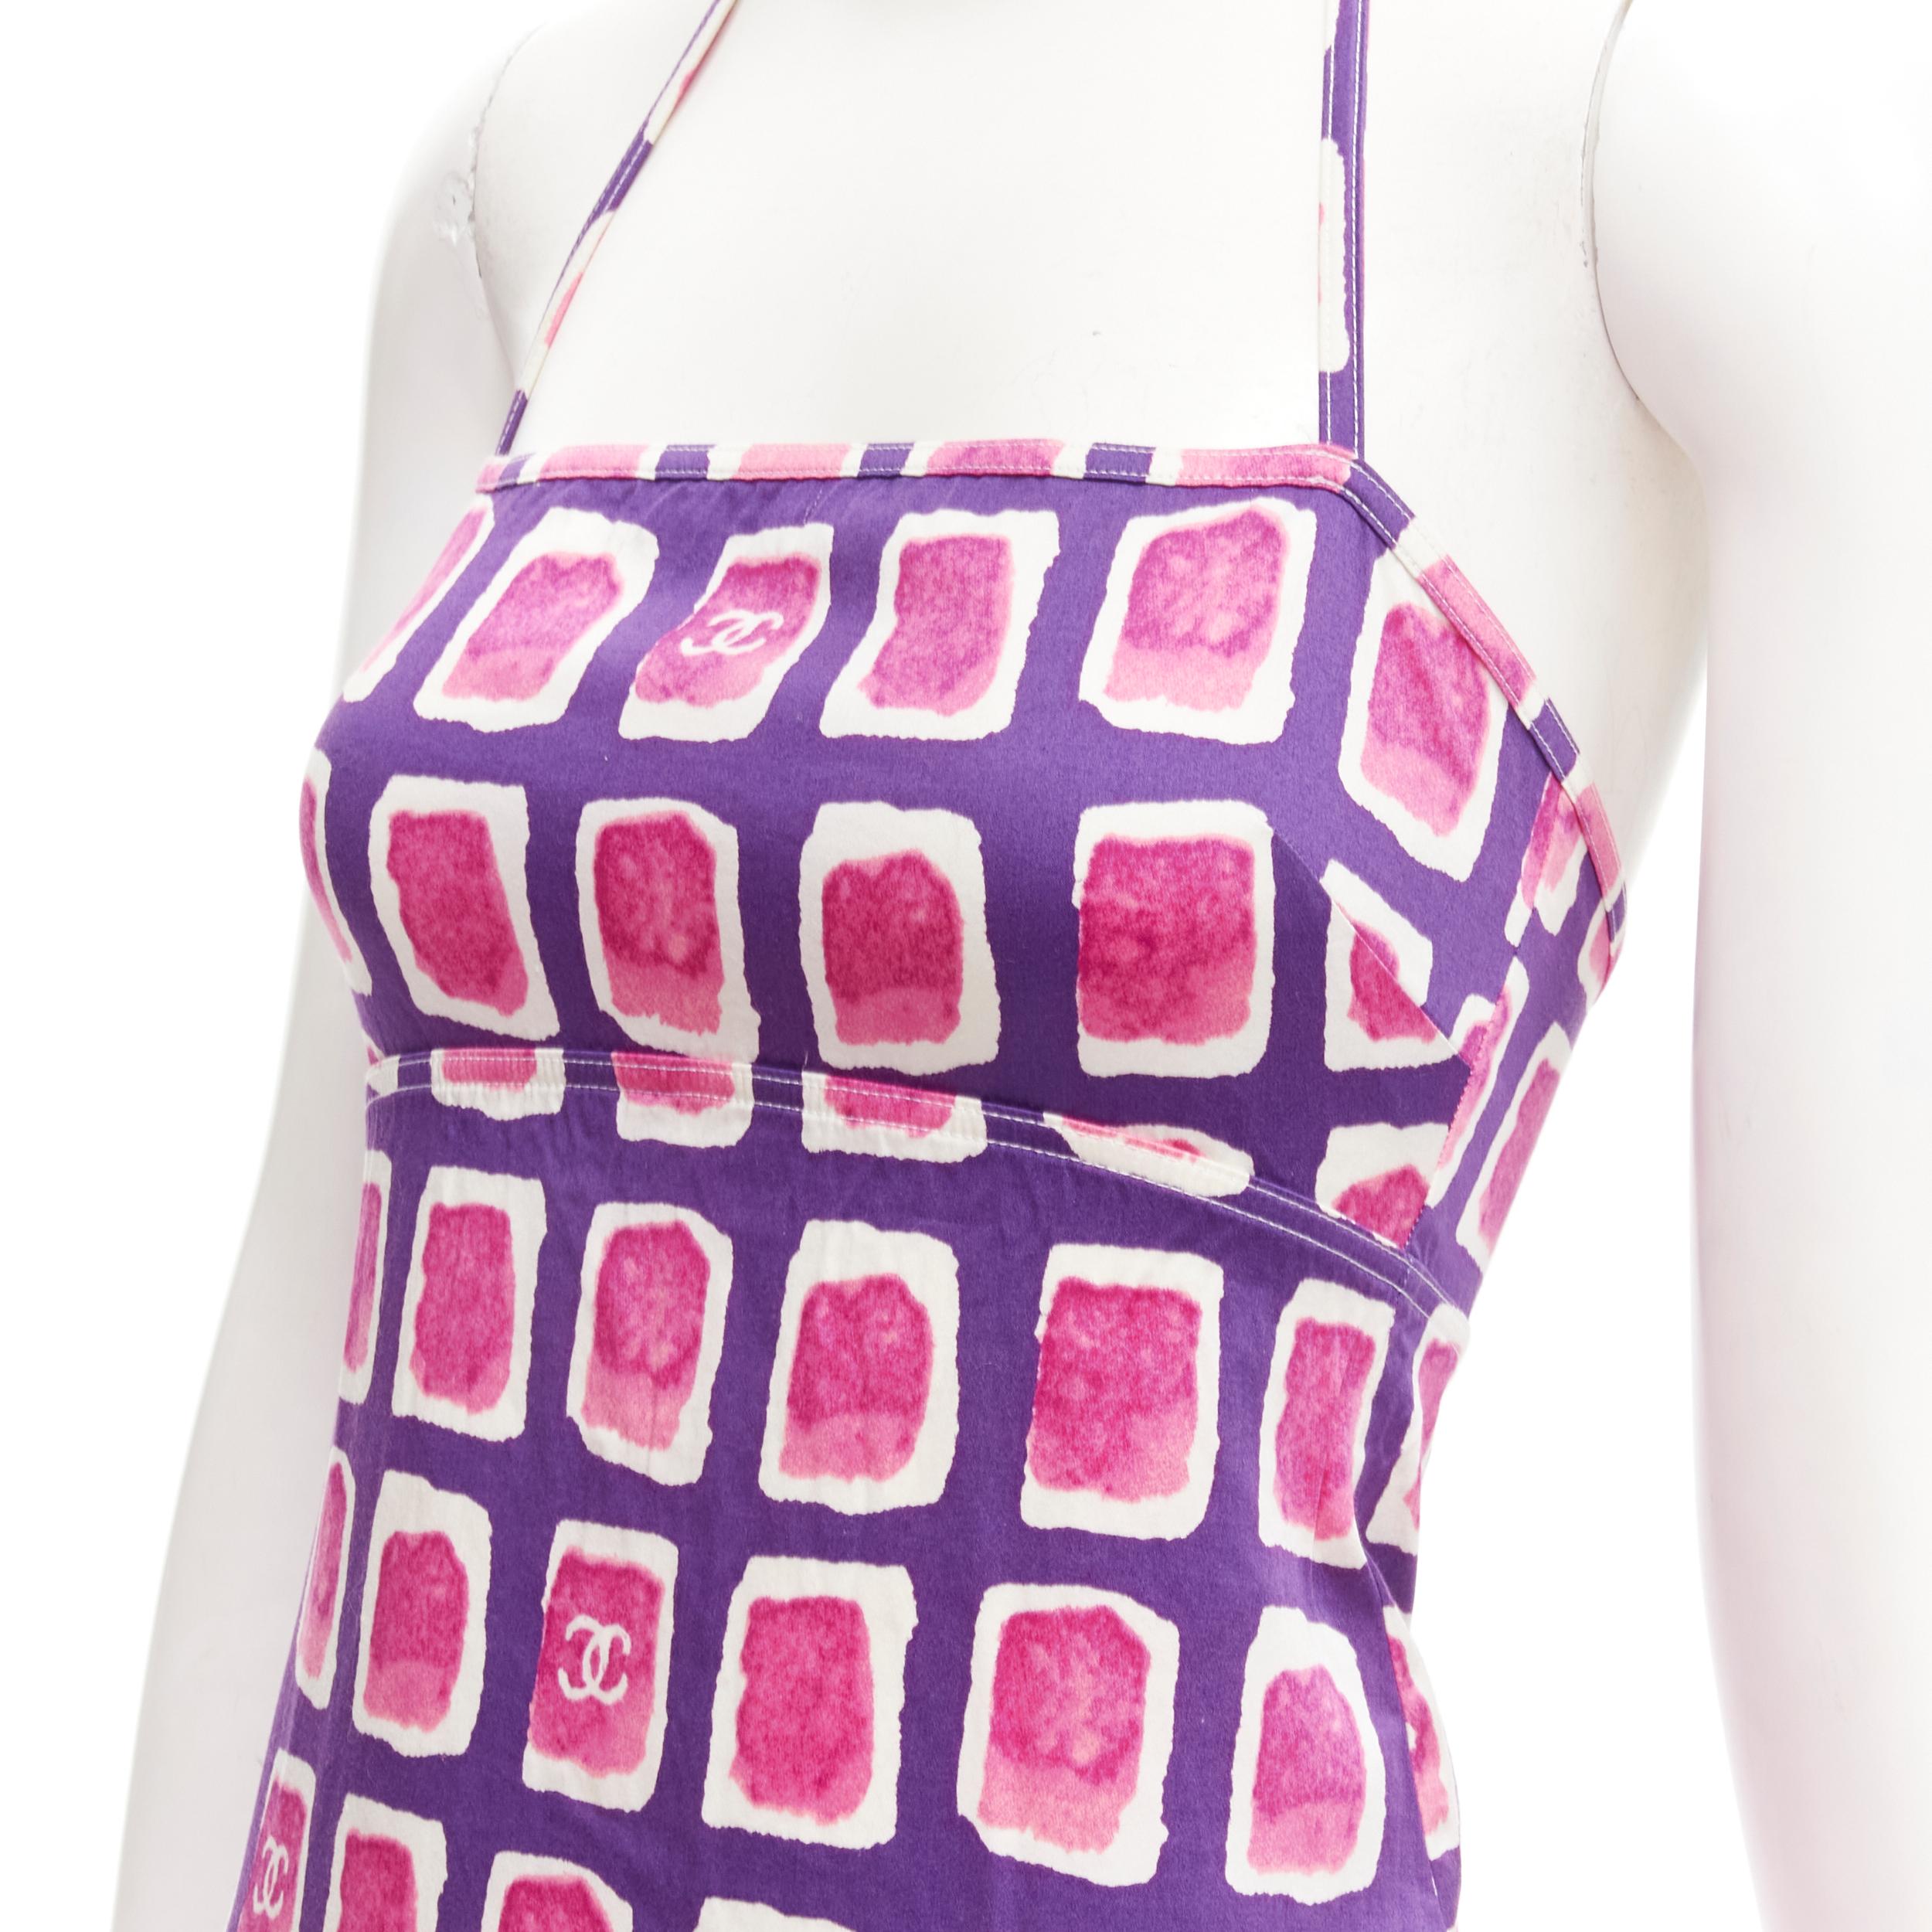 CHANEL 01P CC pink purple brush geometric print halter strap mini dress FR34 XS
Reference: TGAS/C01971
Brand: Chanel
Designer: Karl Lagerfeld
Collection: 2001P
Material: Cotton, Viscose, Elastane
Color: Pink, Purple
Pattern: Abstract
Closure: Halter